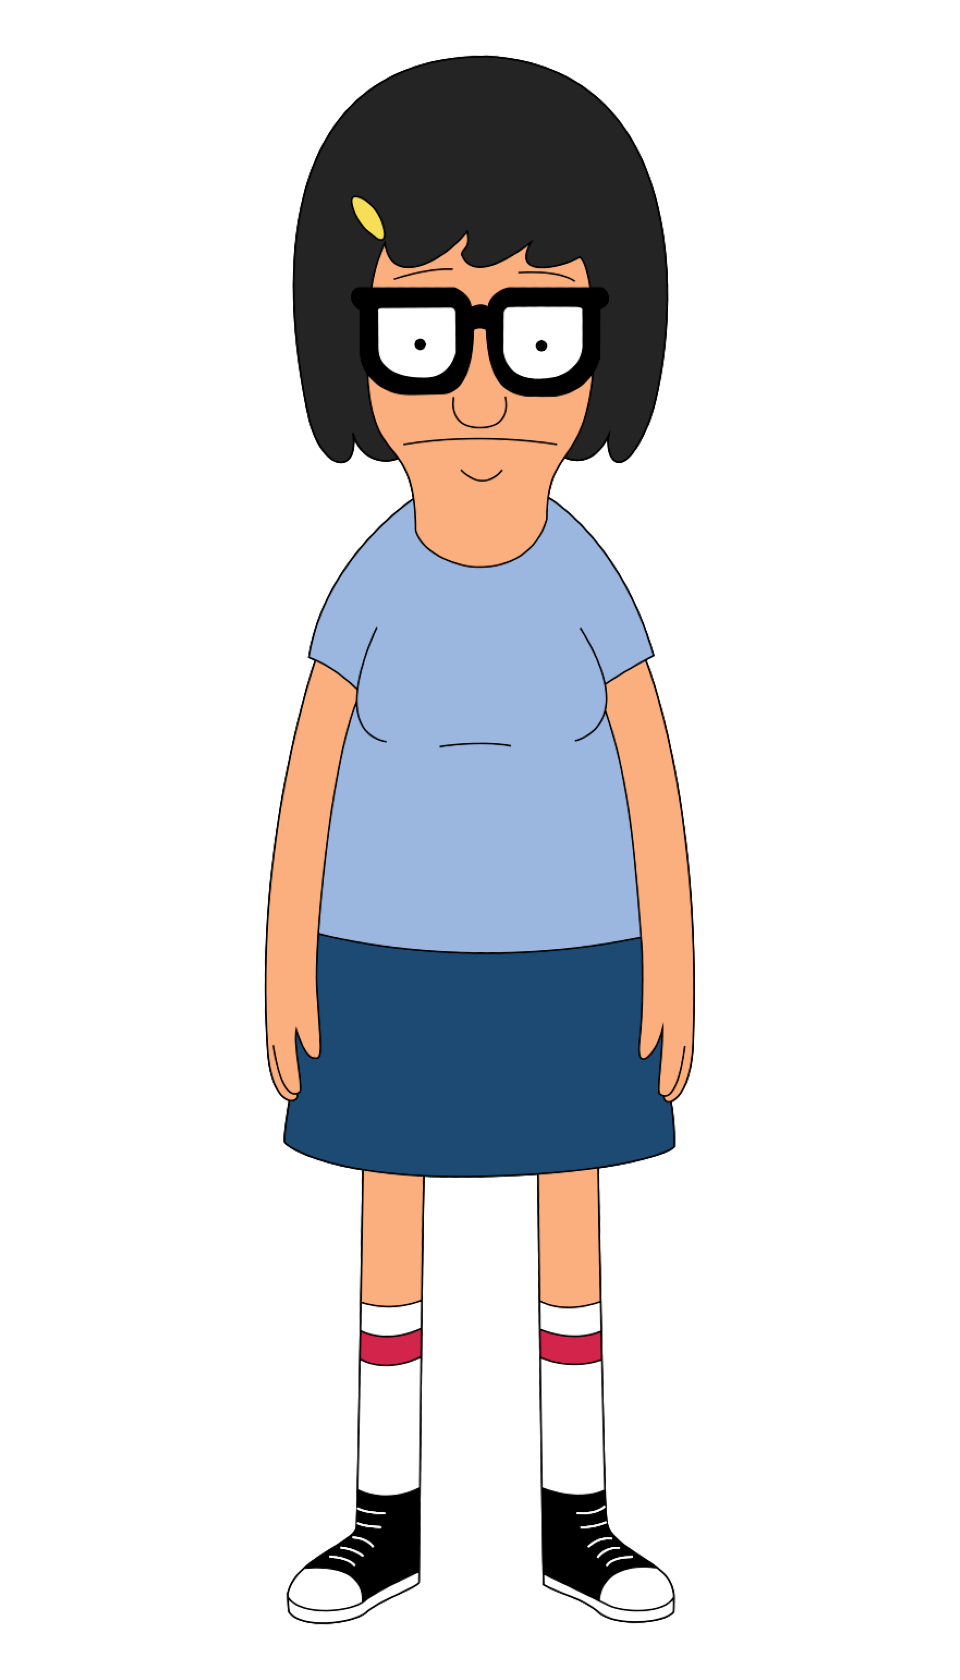 Louise Belcher Costume - Bob's Burgers : 5 Steps (with Pictures